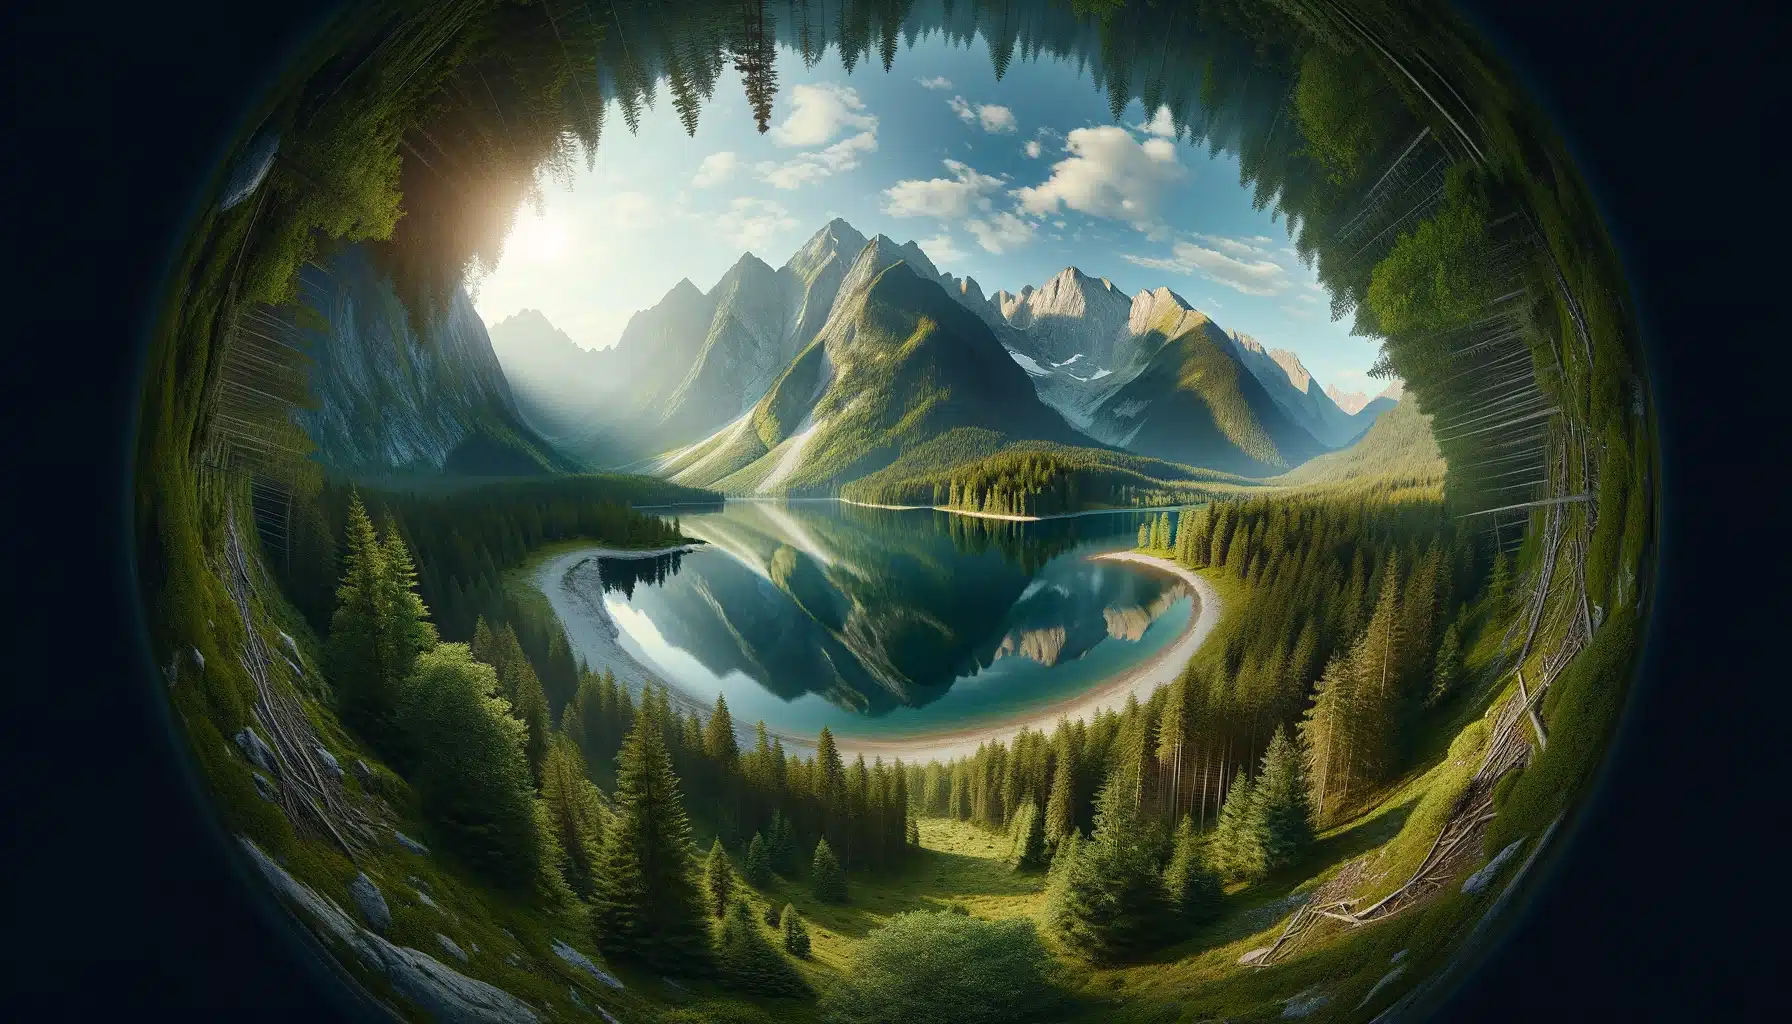 Full-sphere picture view of a serene mountain landscape, with majestic mountains, a reflective lake, and lush greenery, creating an natural experience.